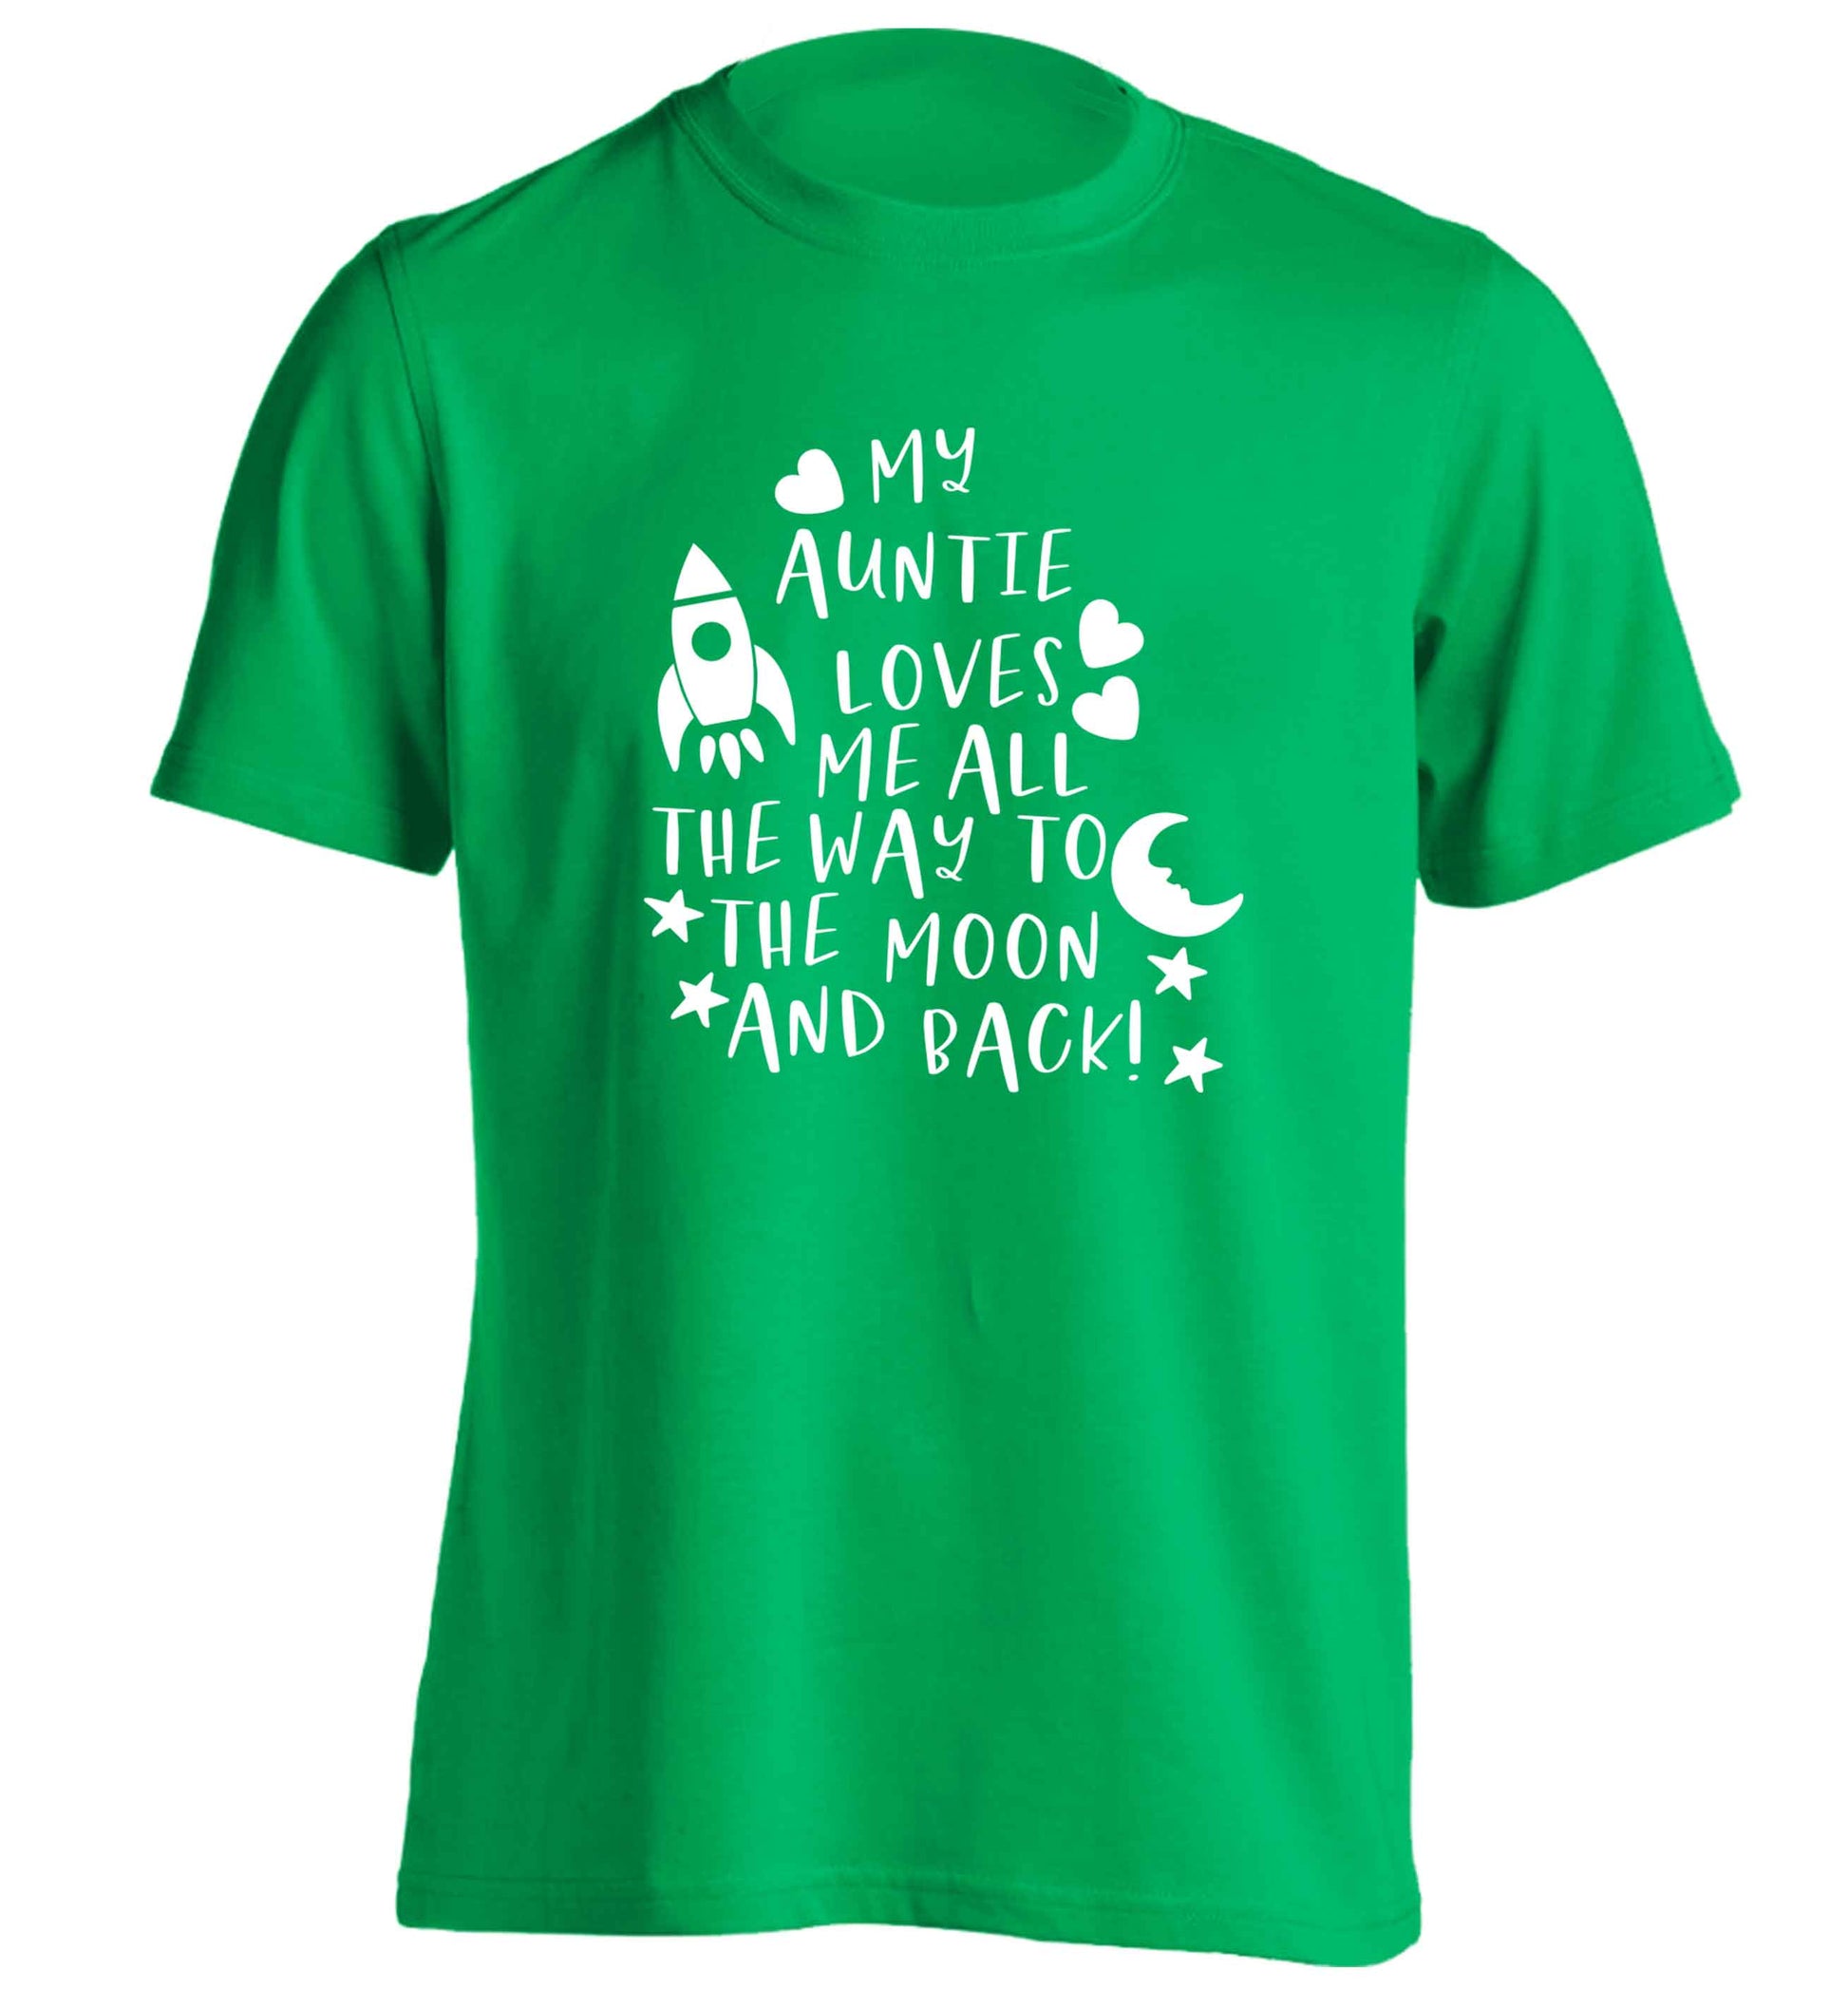 My auntie loves me all the way to the moon and back adults unisex green Tshirt 2XL